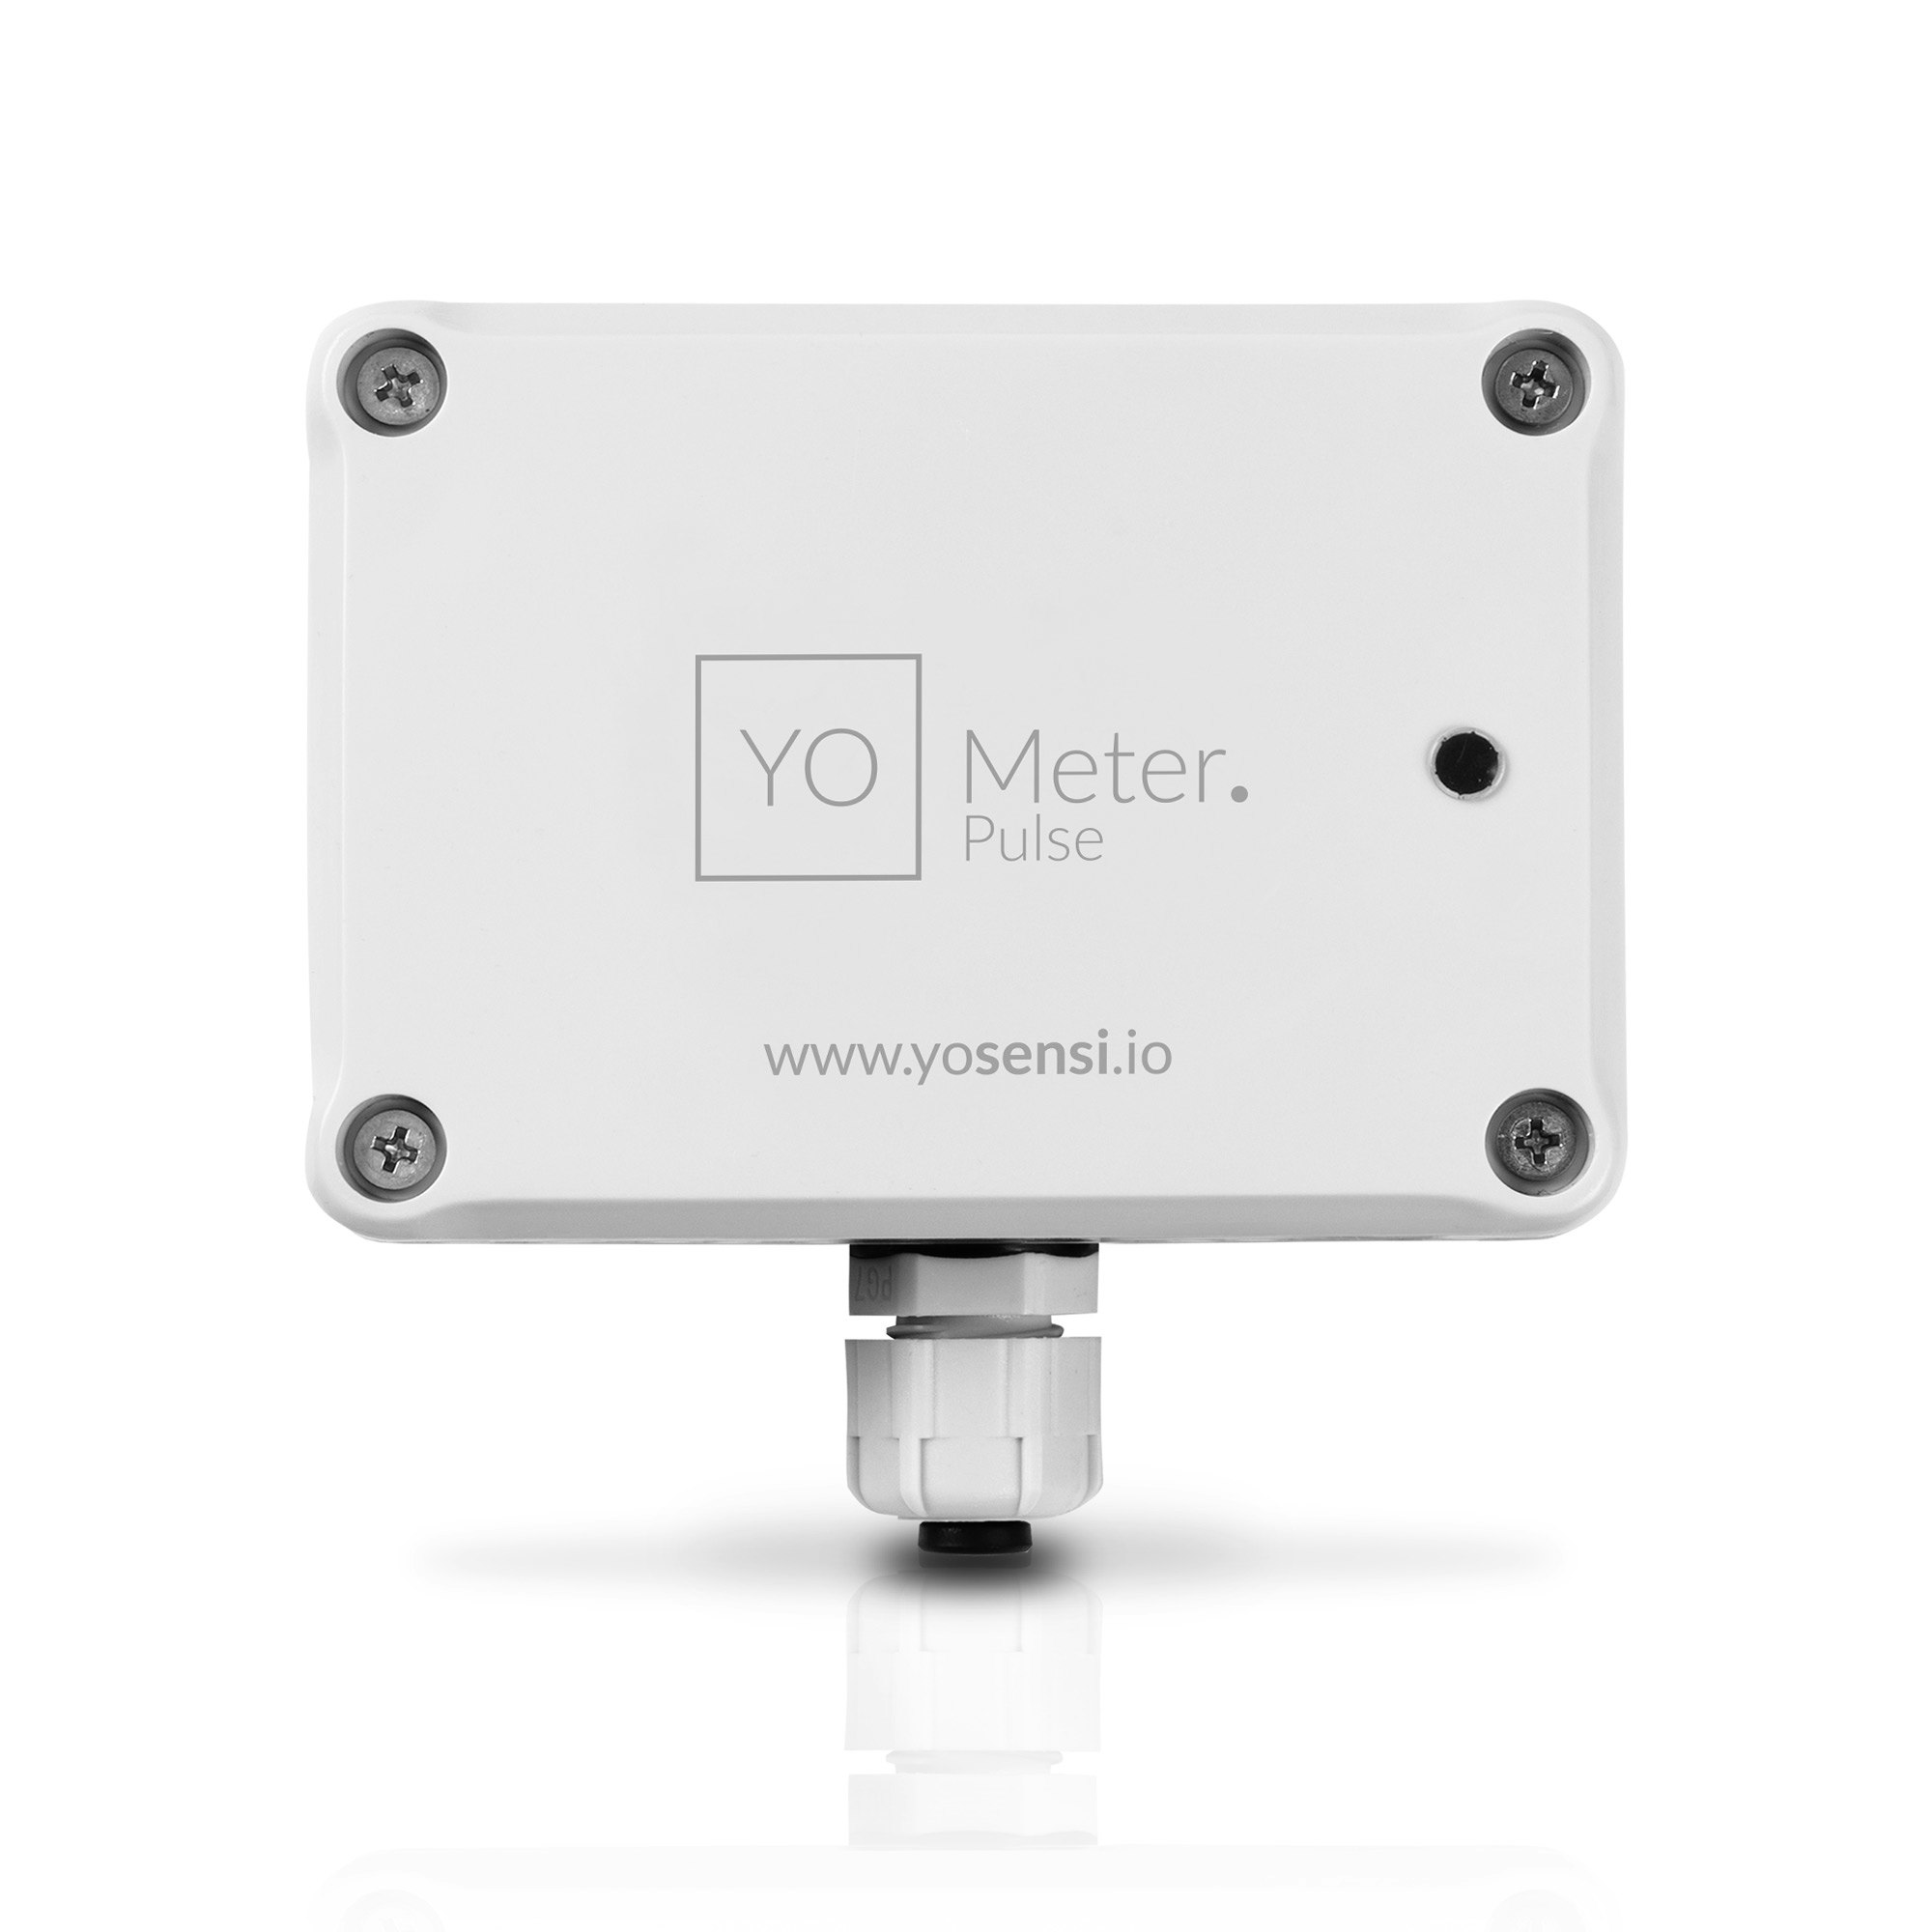 YOSENSI | YO Meter (pulse) input accepts connection to potential-free contacts